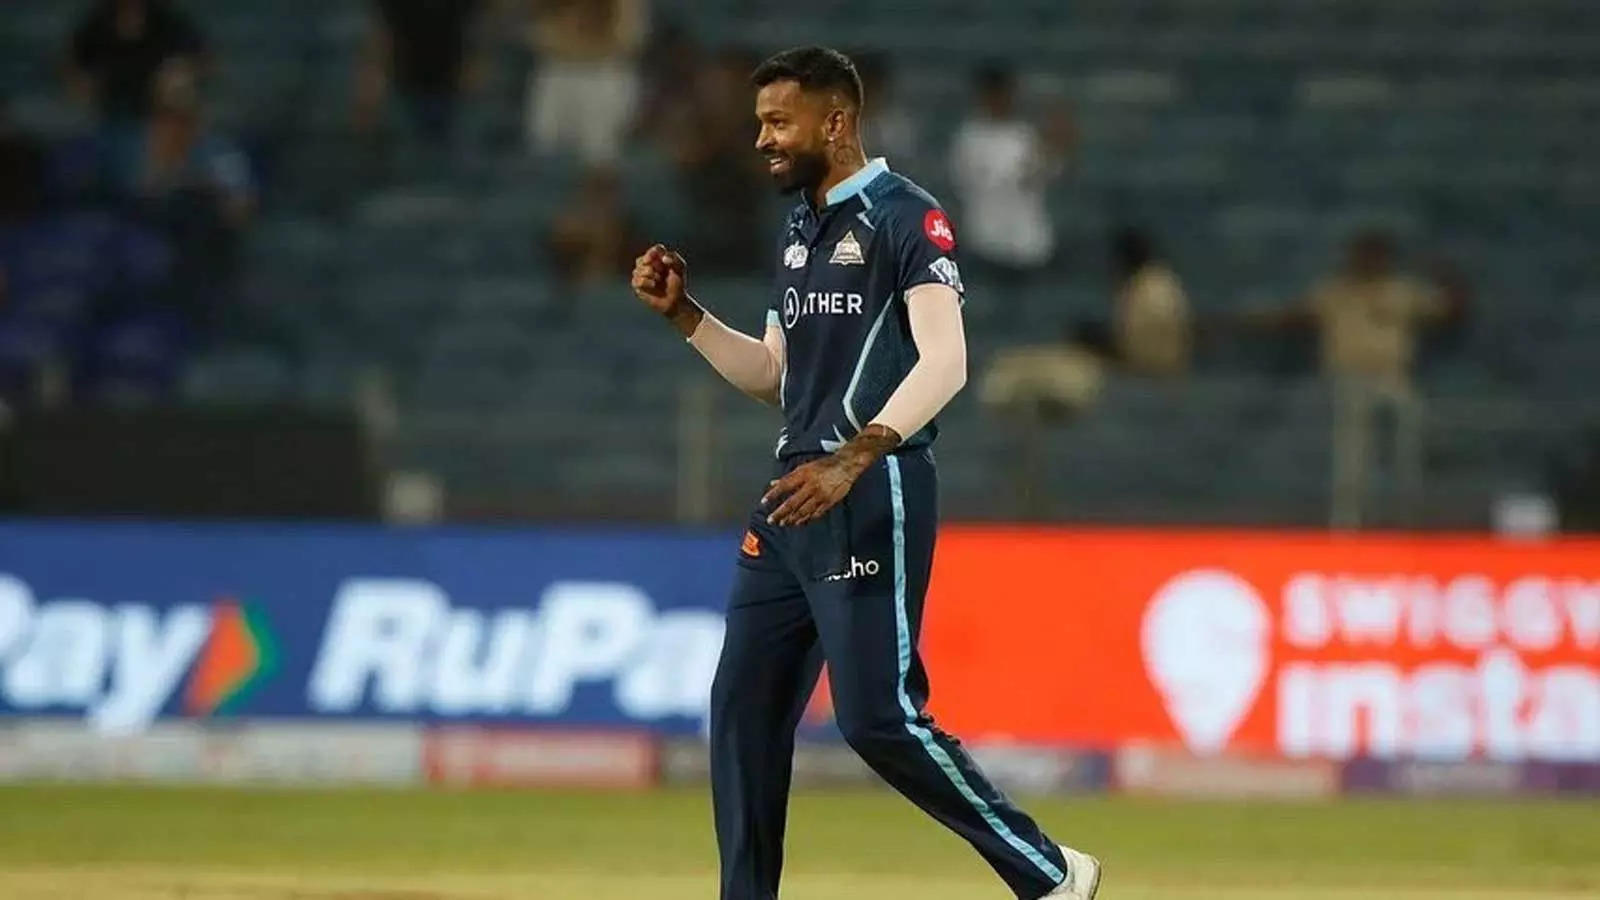 Can't pick a player for bowling at 140 kmph in two matches: Ex-India  cricketer on Hardik Pandya